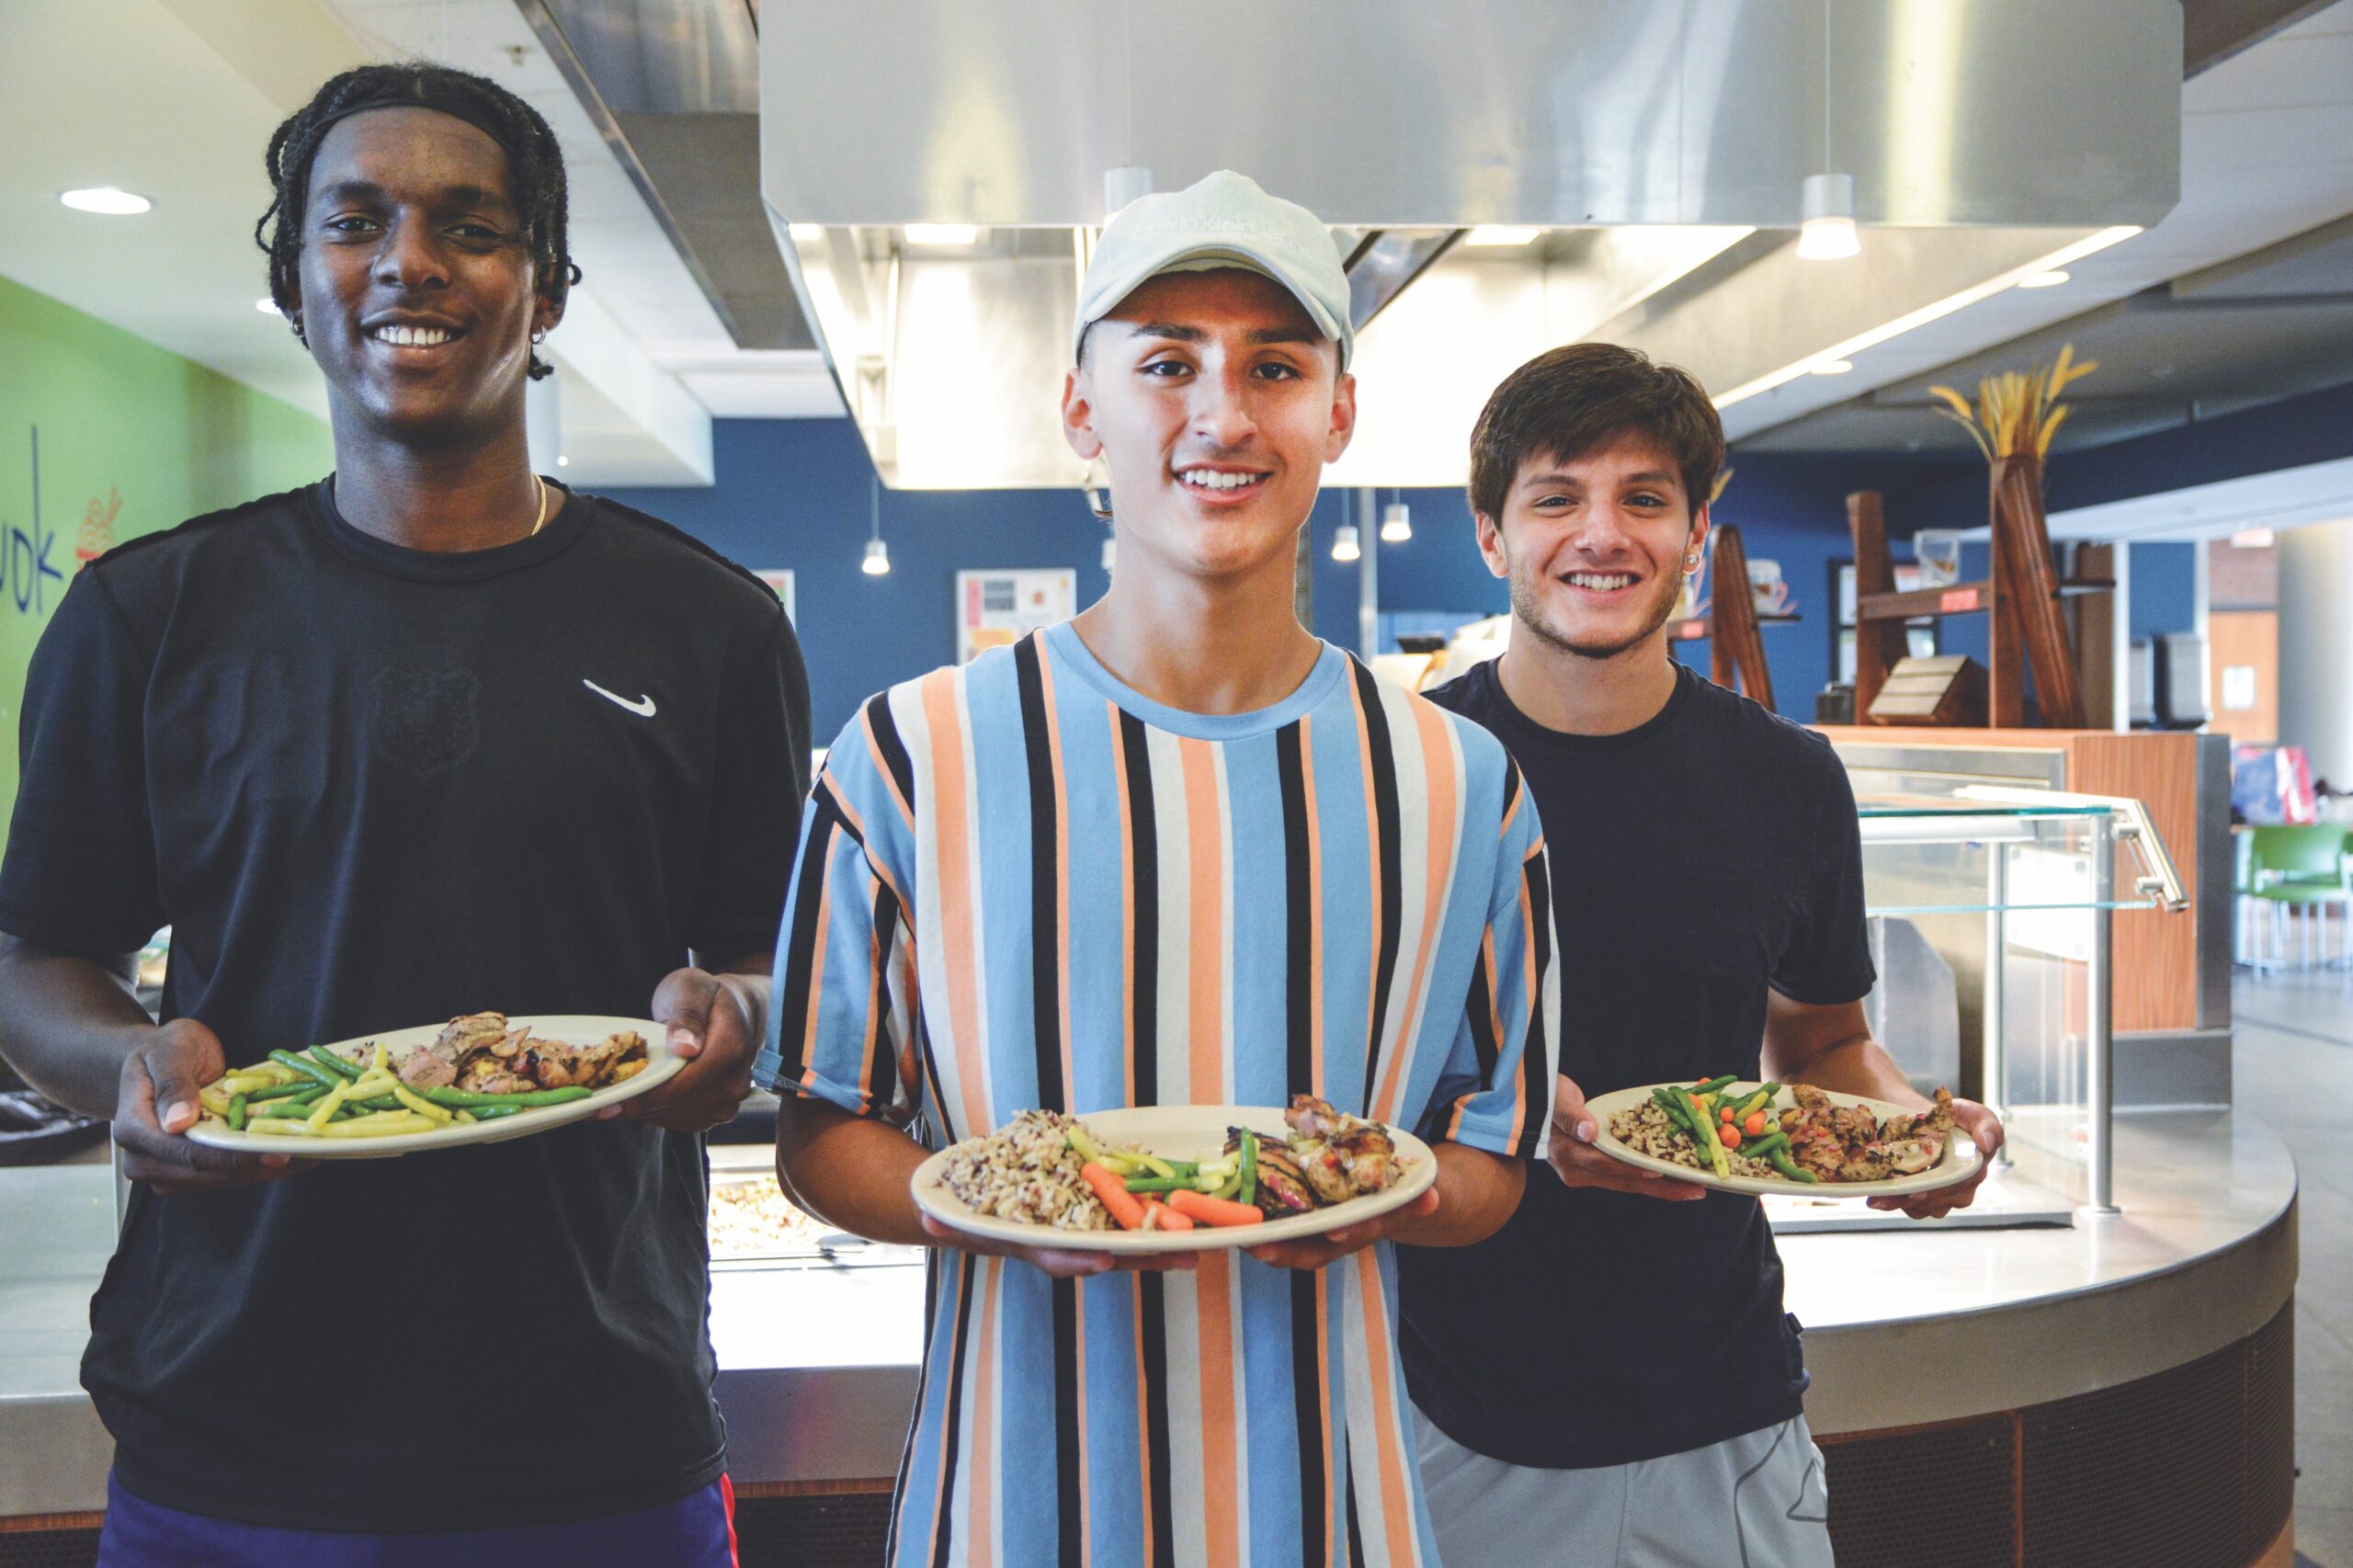 Students working in their college dining program